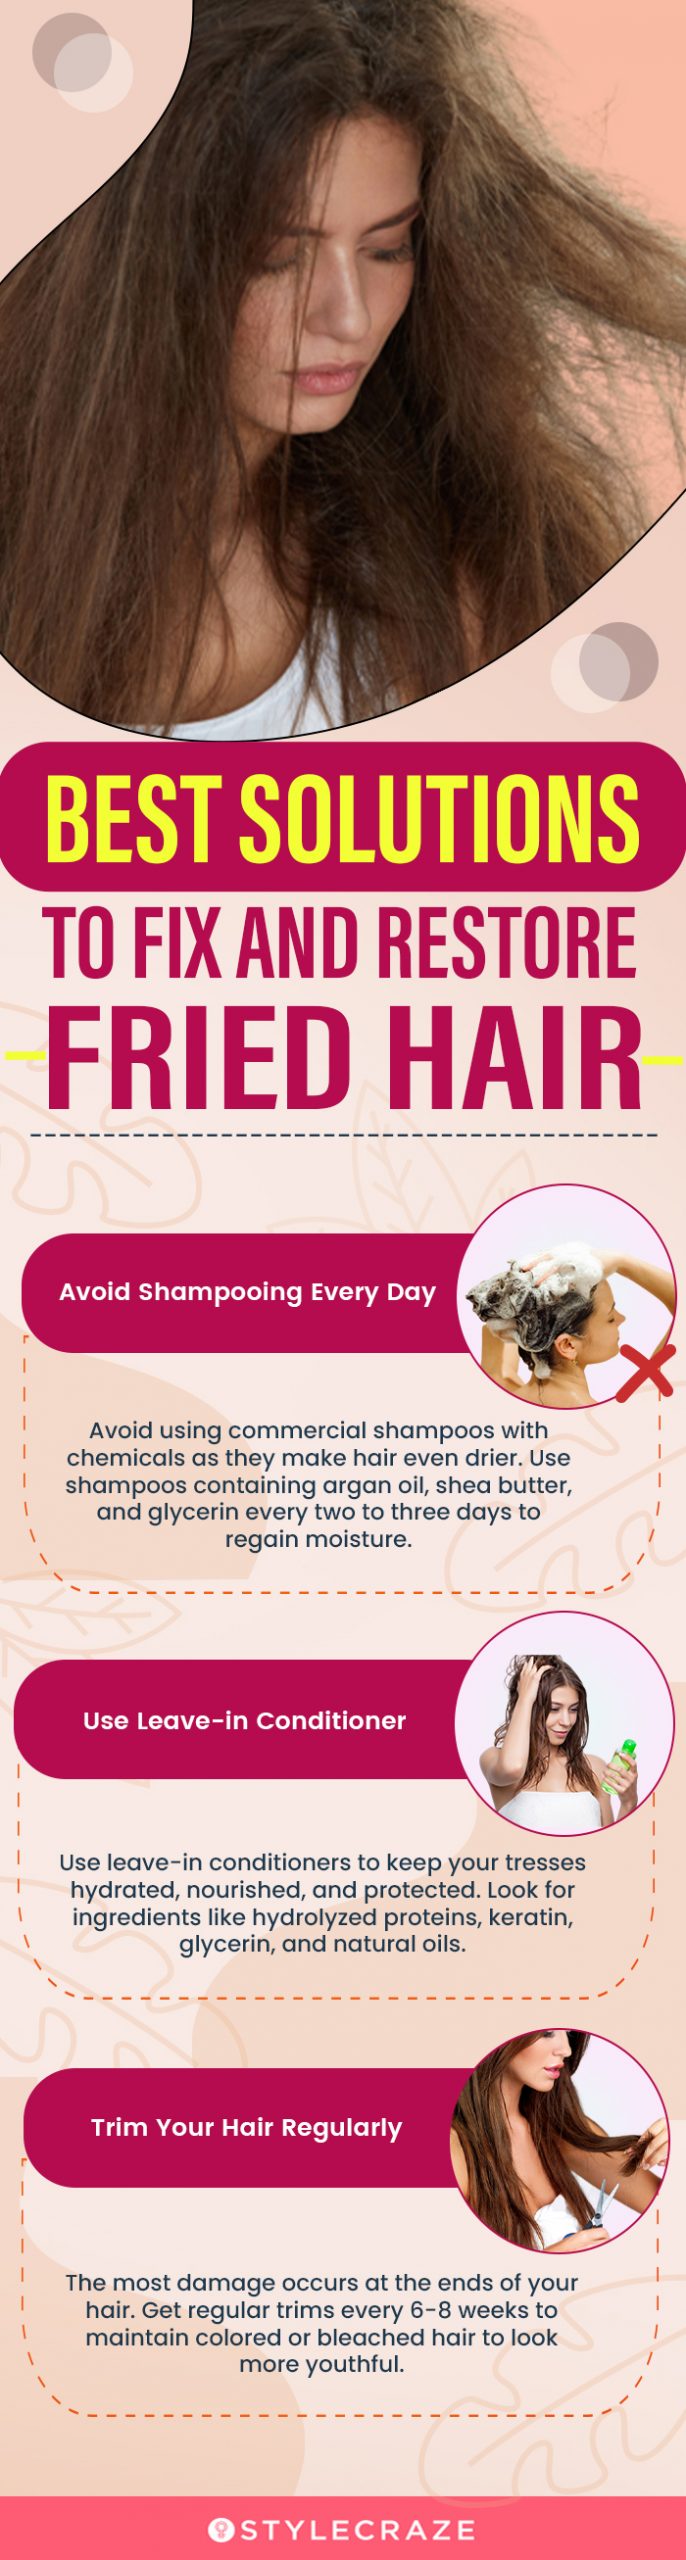 How To Treat Fried Hair: 10 Effective Solutions